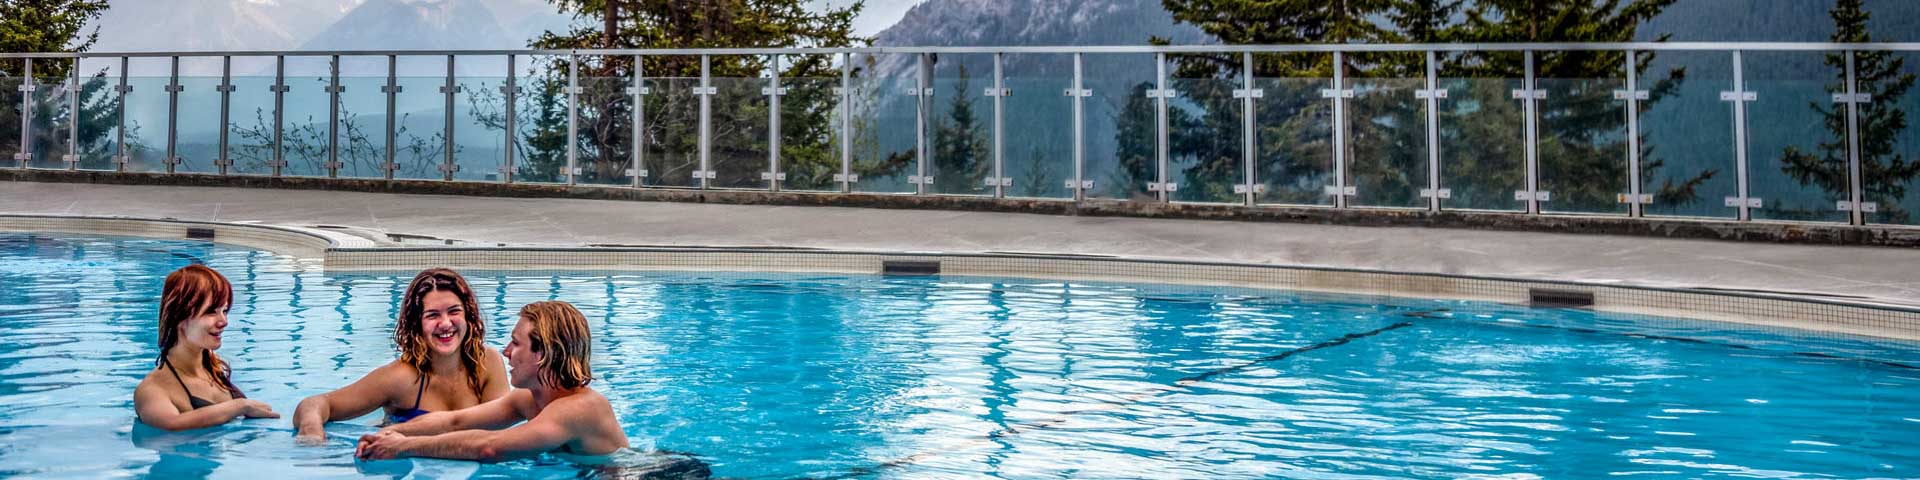 Three persons chatting in the pool with a mountain backdrop at Upper Banff Hot Springs.